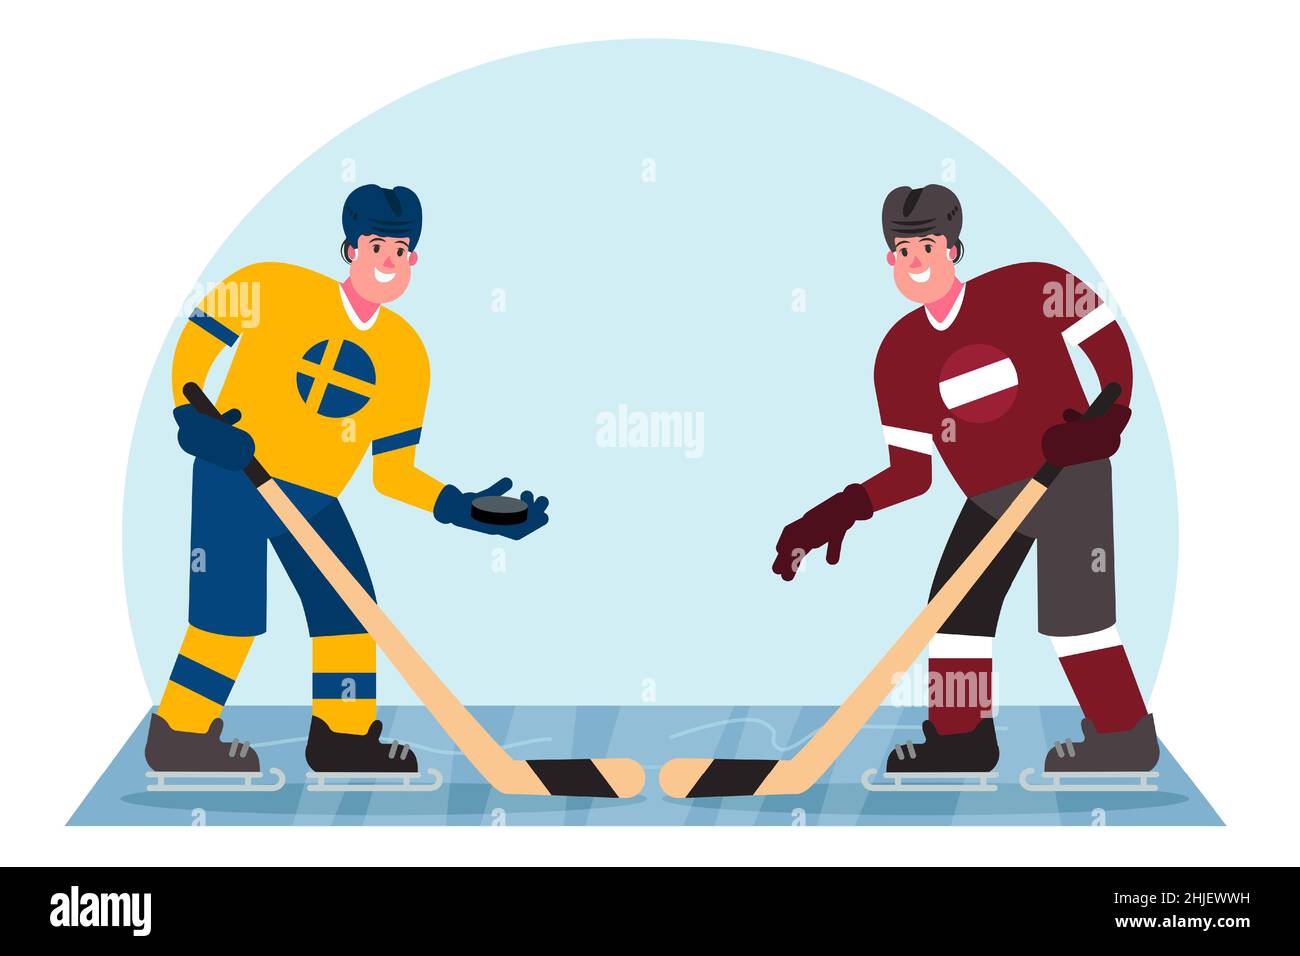 Ice hockey players. Competition between Sweden and Latvia. Vector illustration in a flat style. Stock Vector